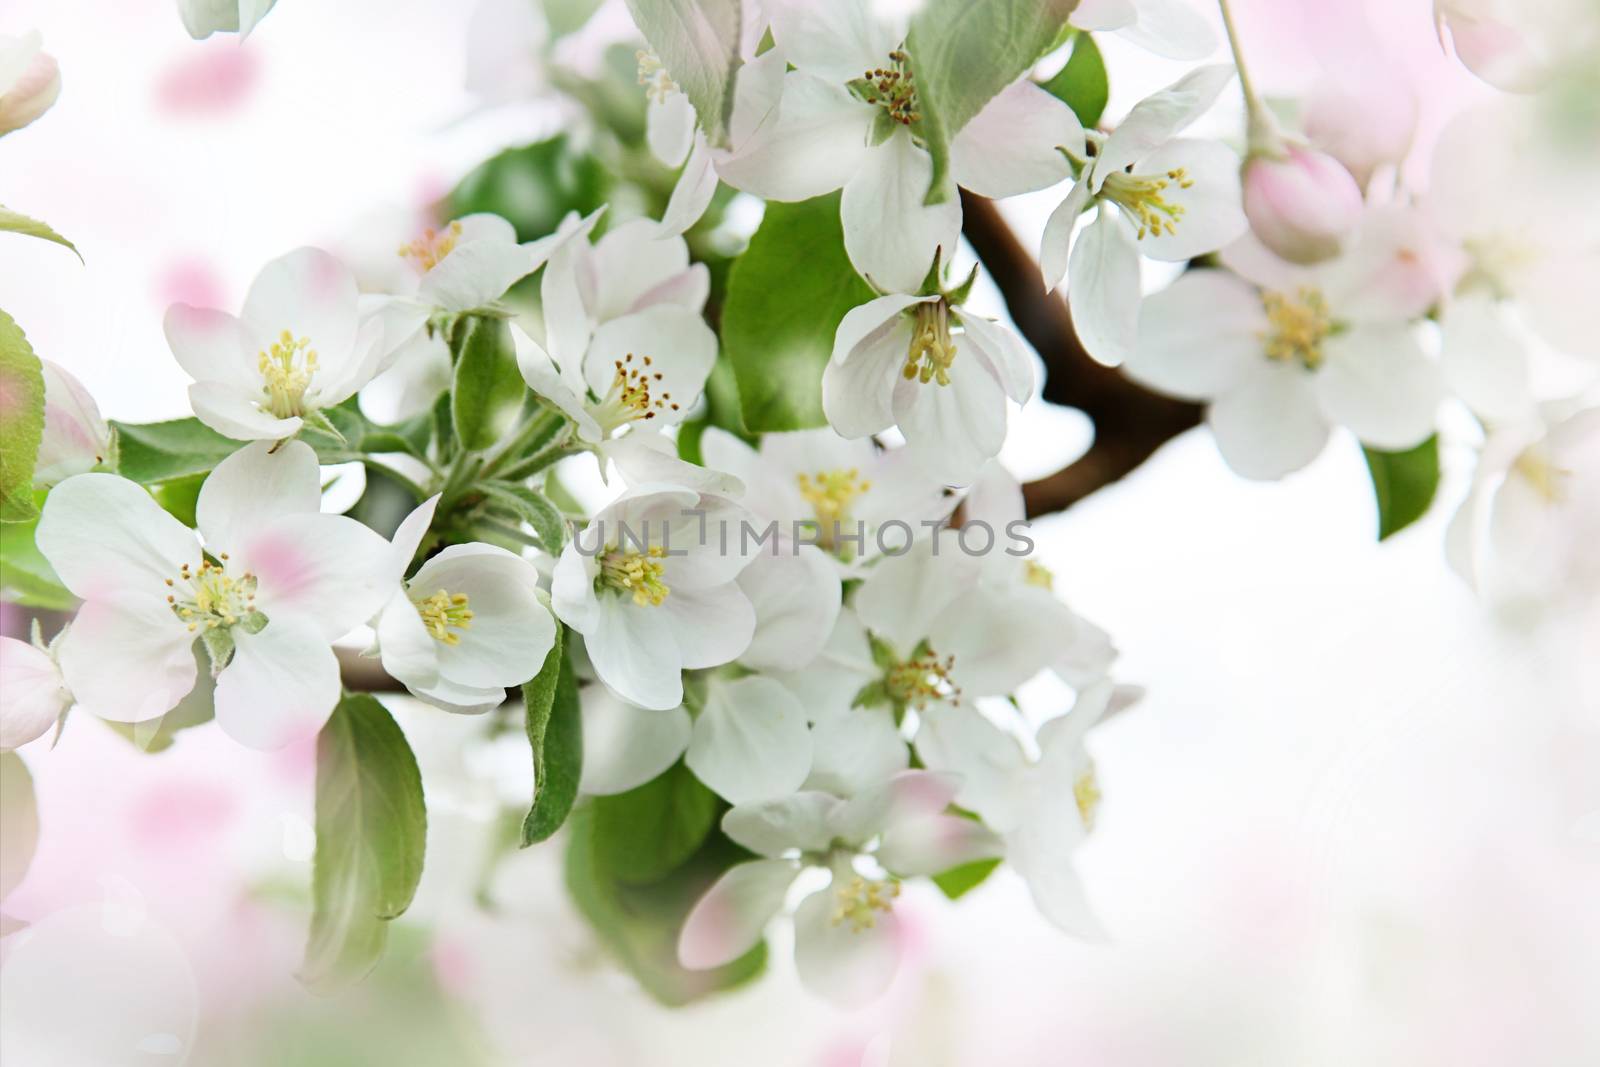 Spring blossoms against a soft focus background